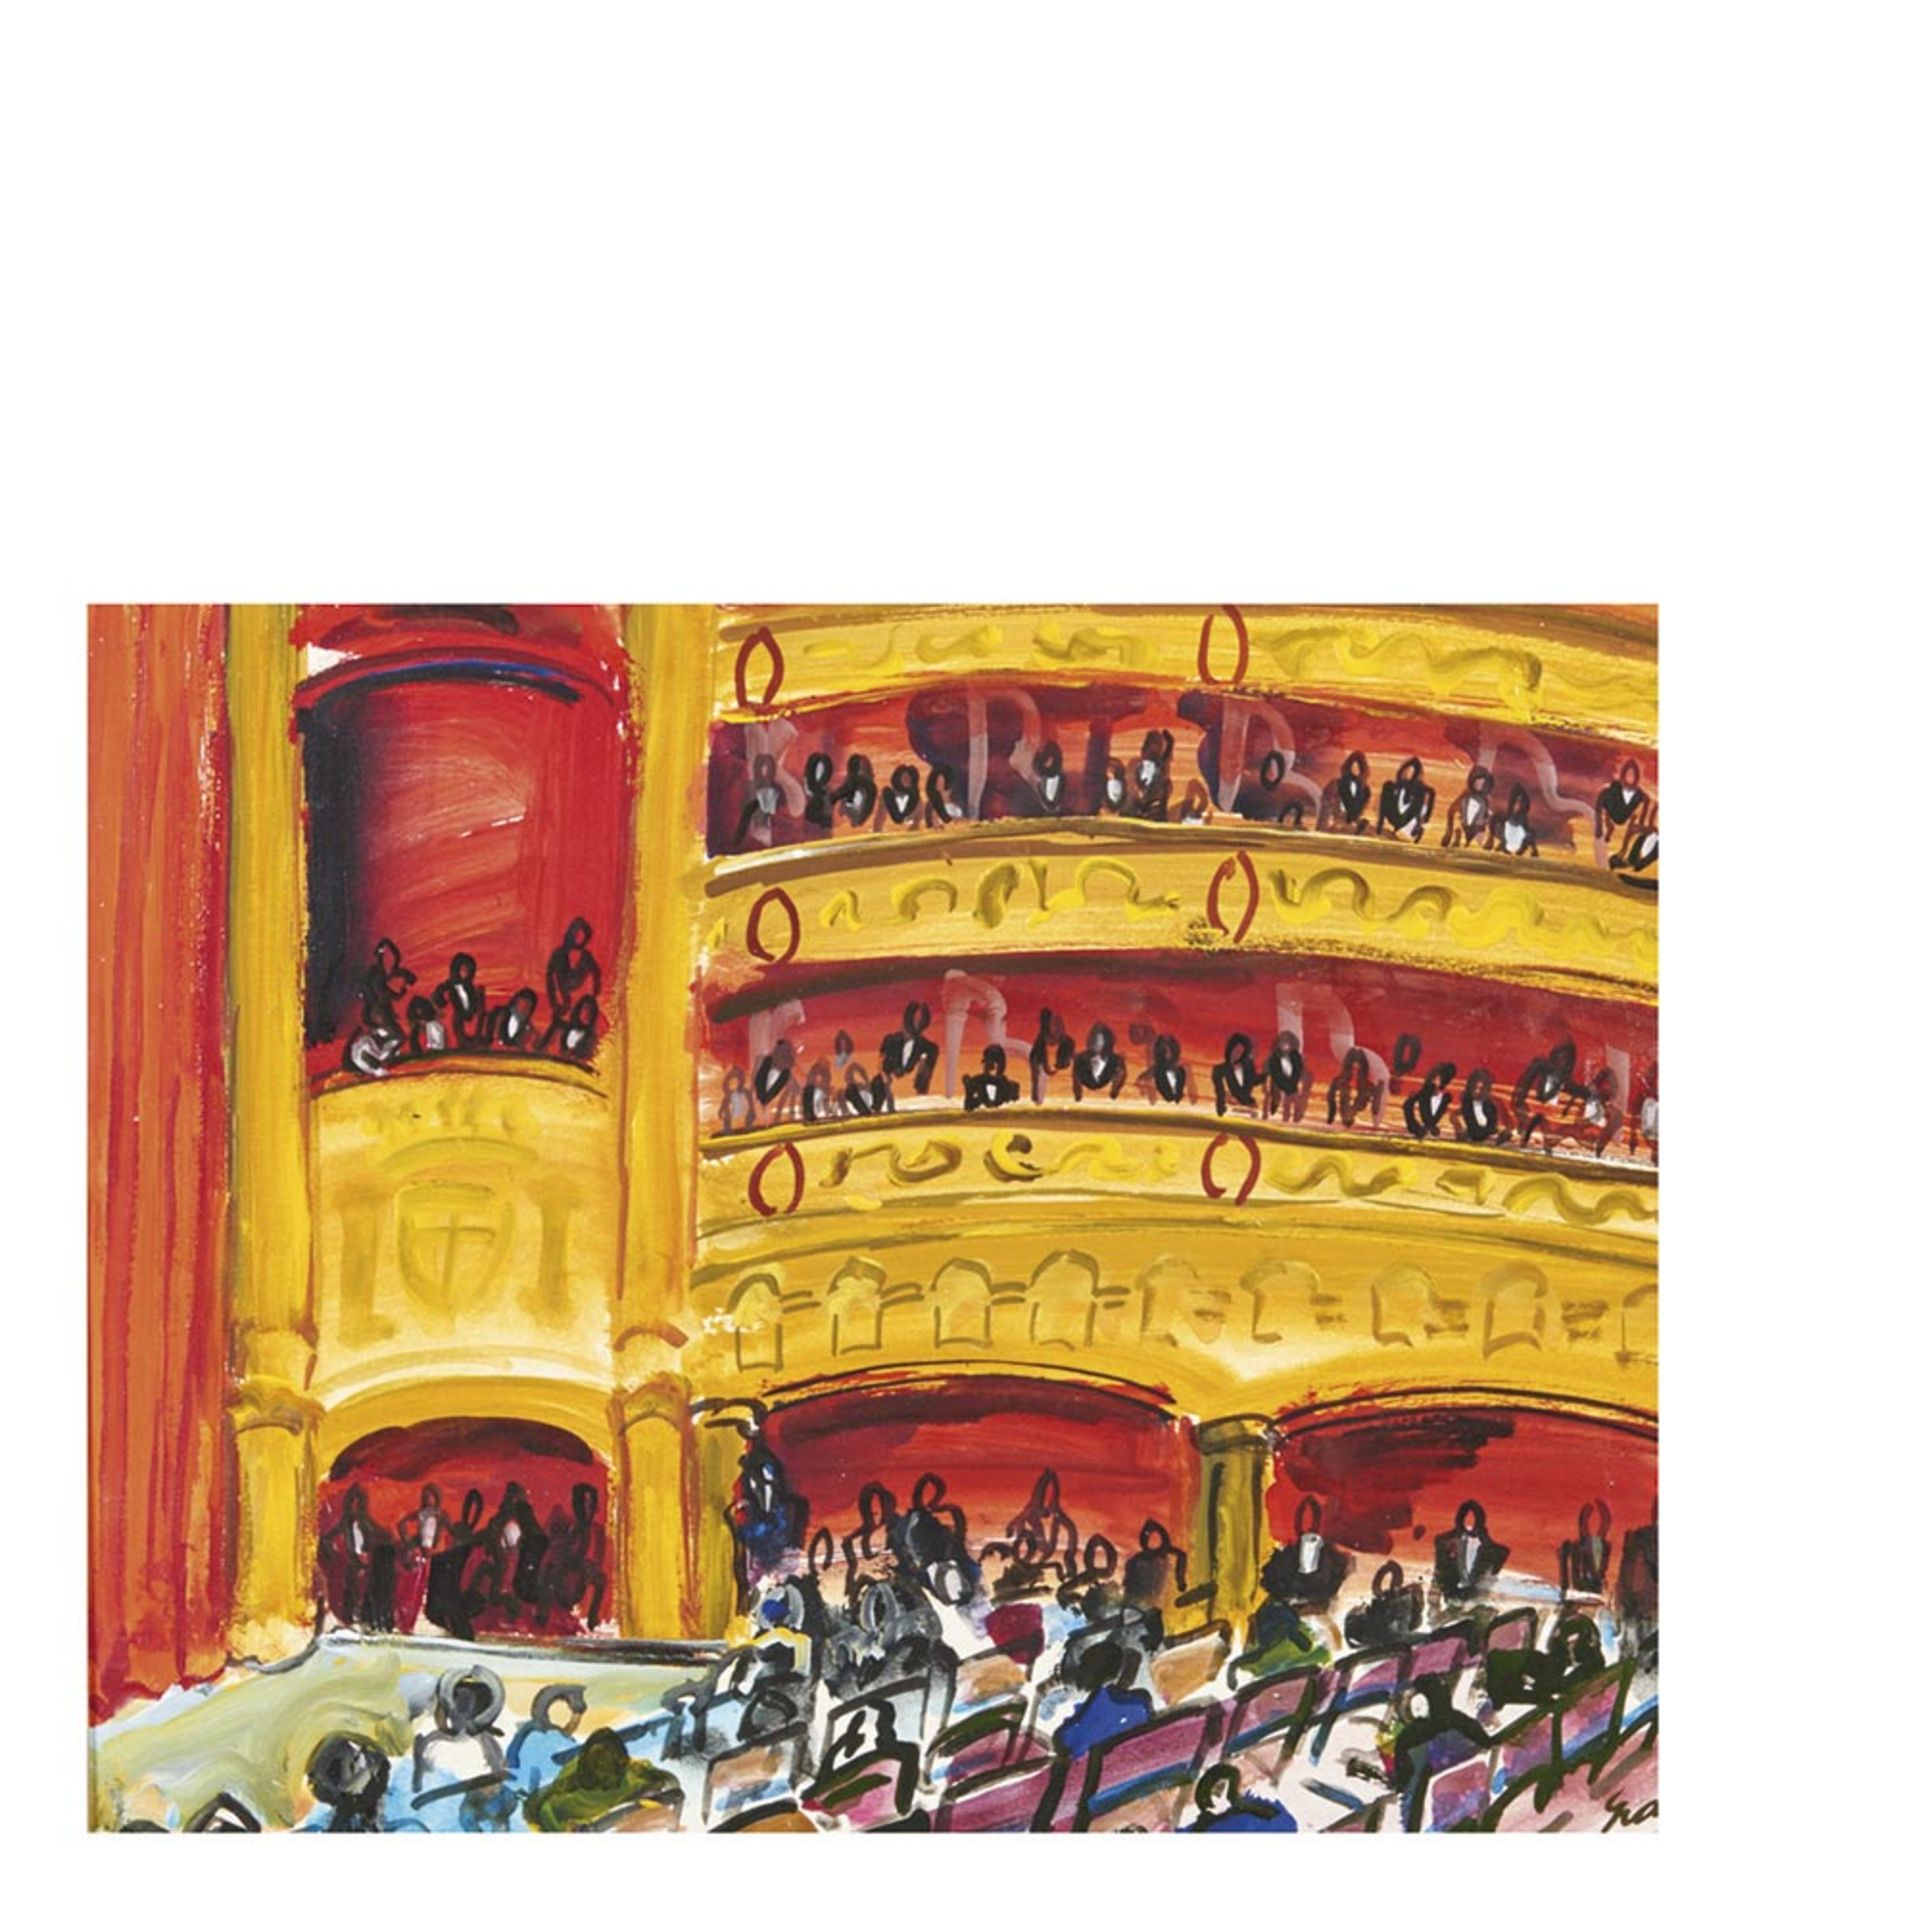 Interior of theater. Mixed media on paper